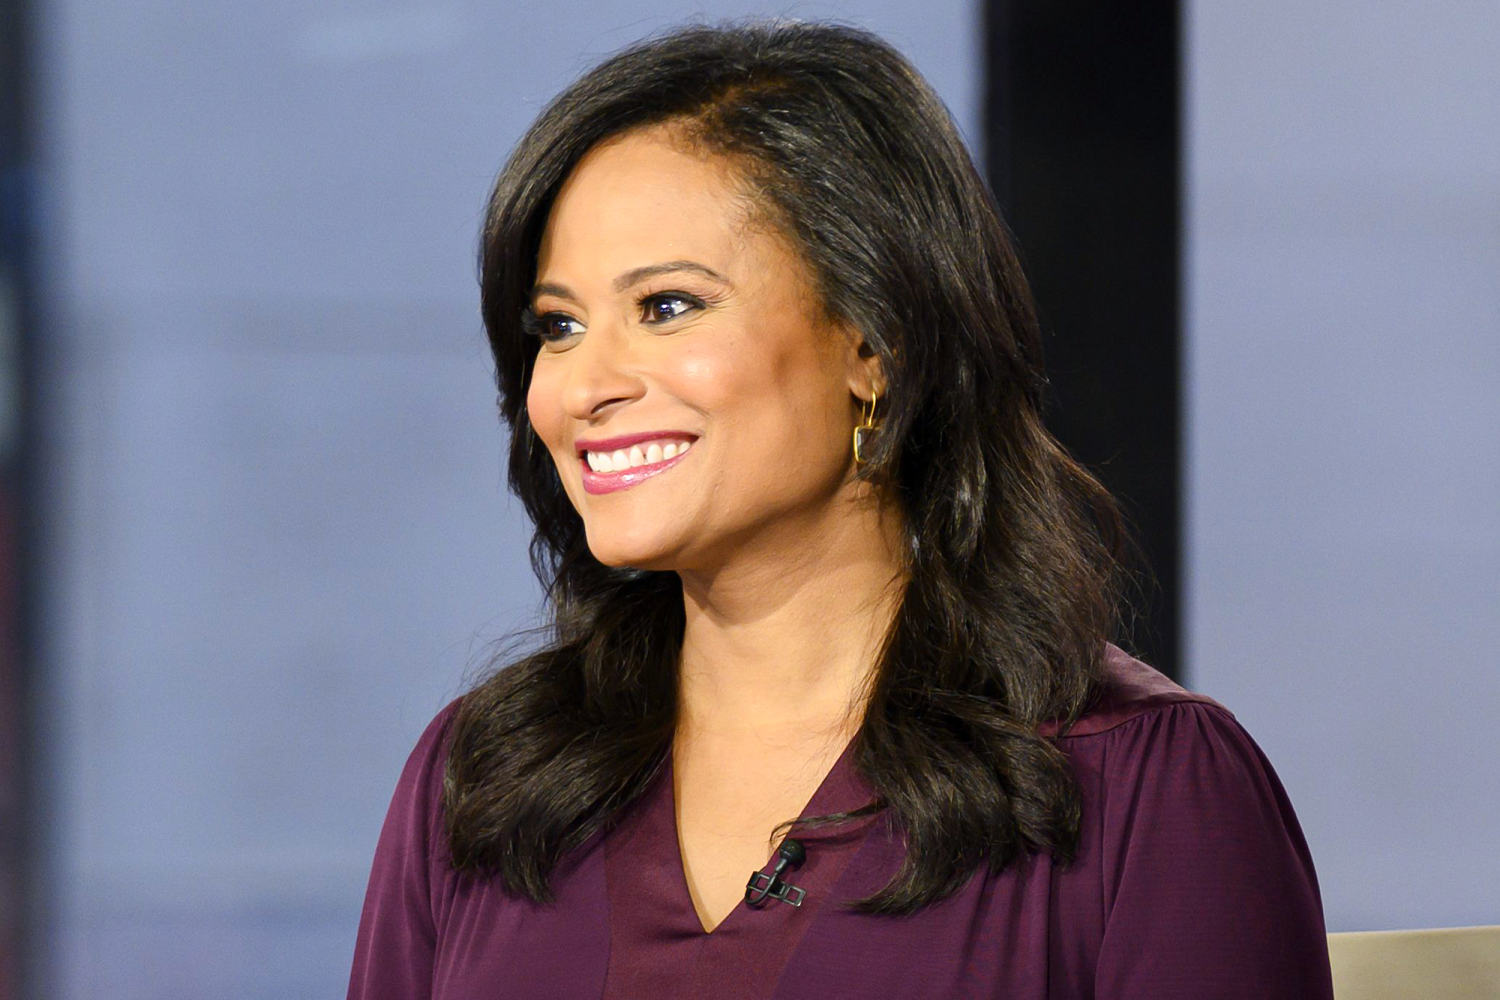 'Meet the Press' moderator Kristen Welker is expecting baby No. 2 with help from a surrogate